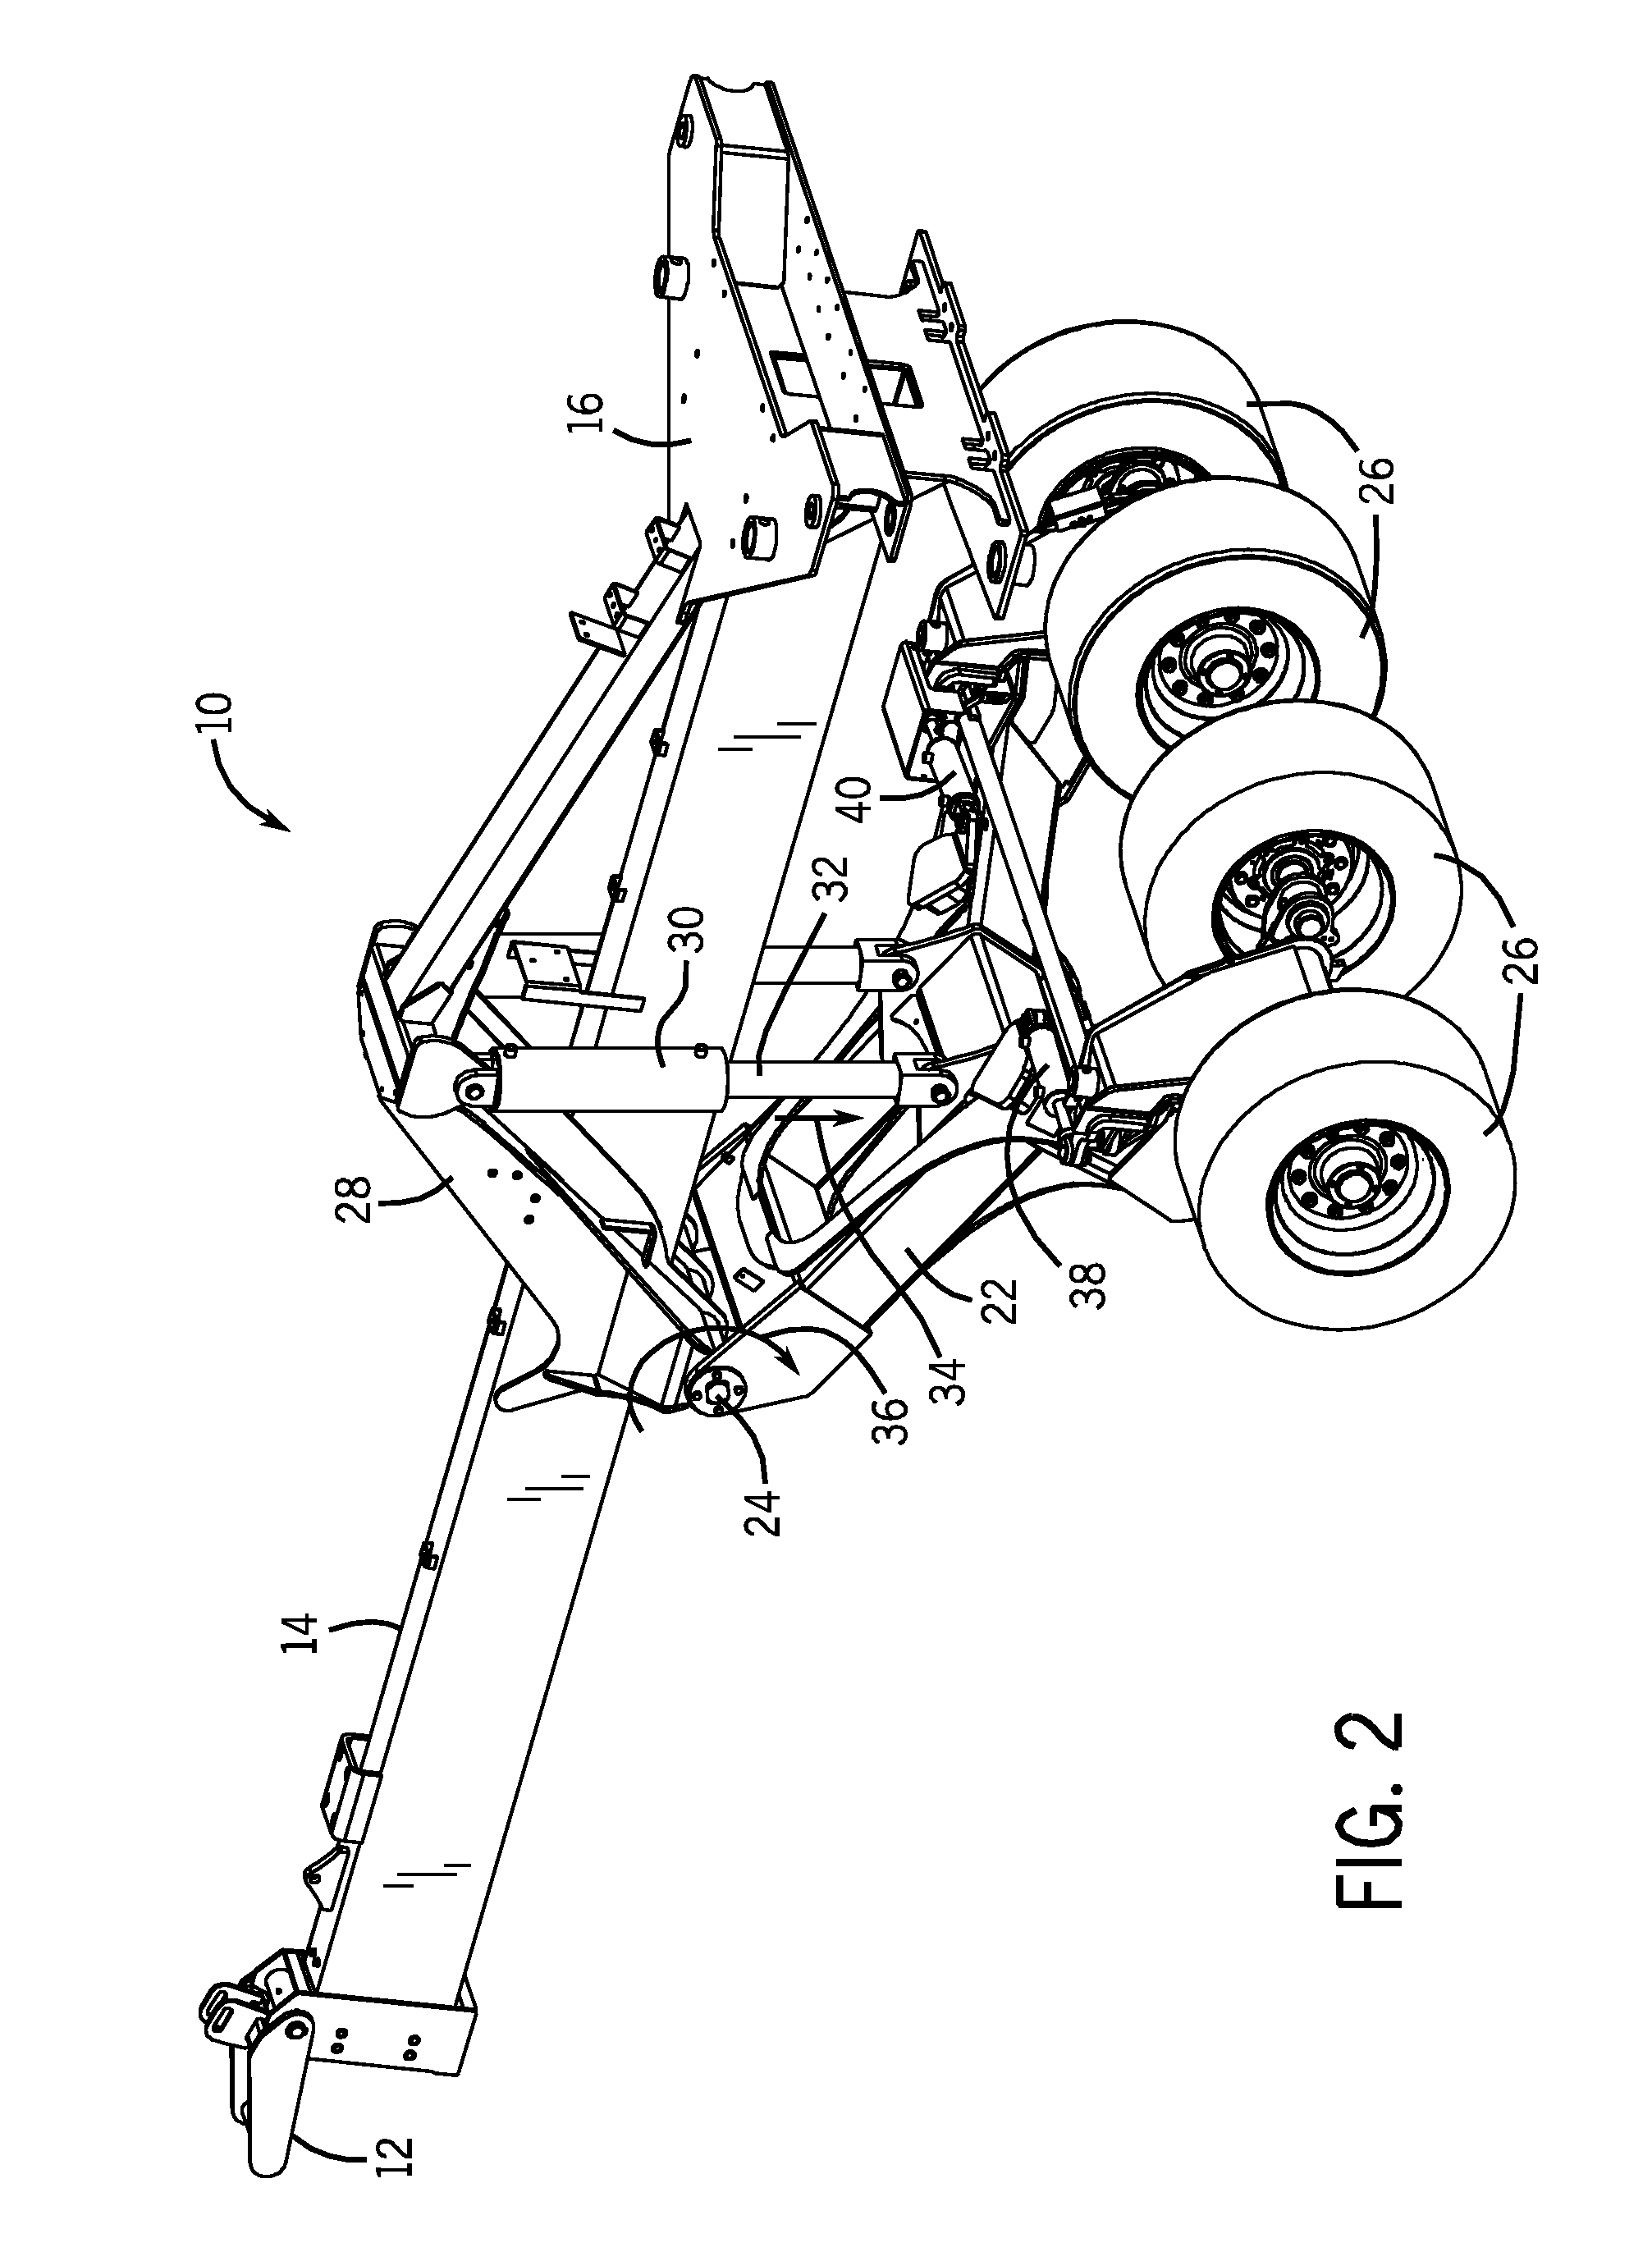 Fluid control system for steerable agricultural implement